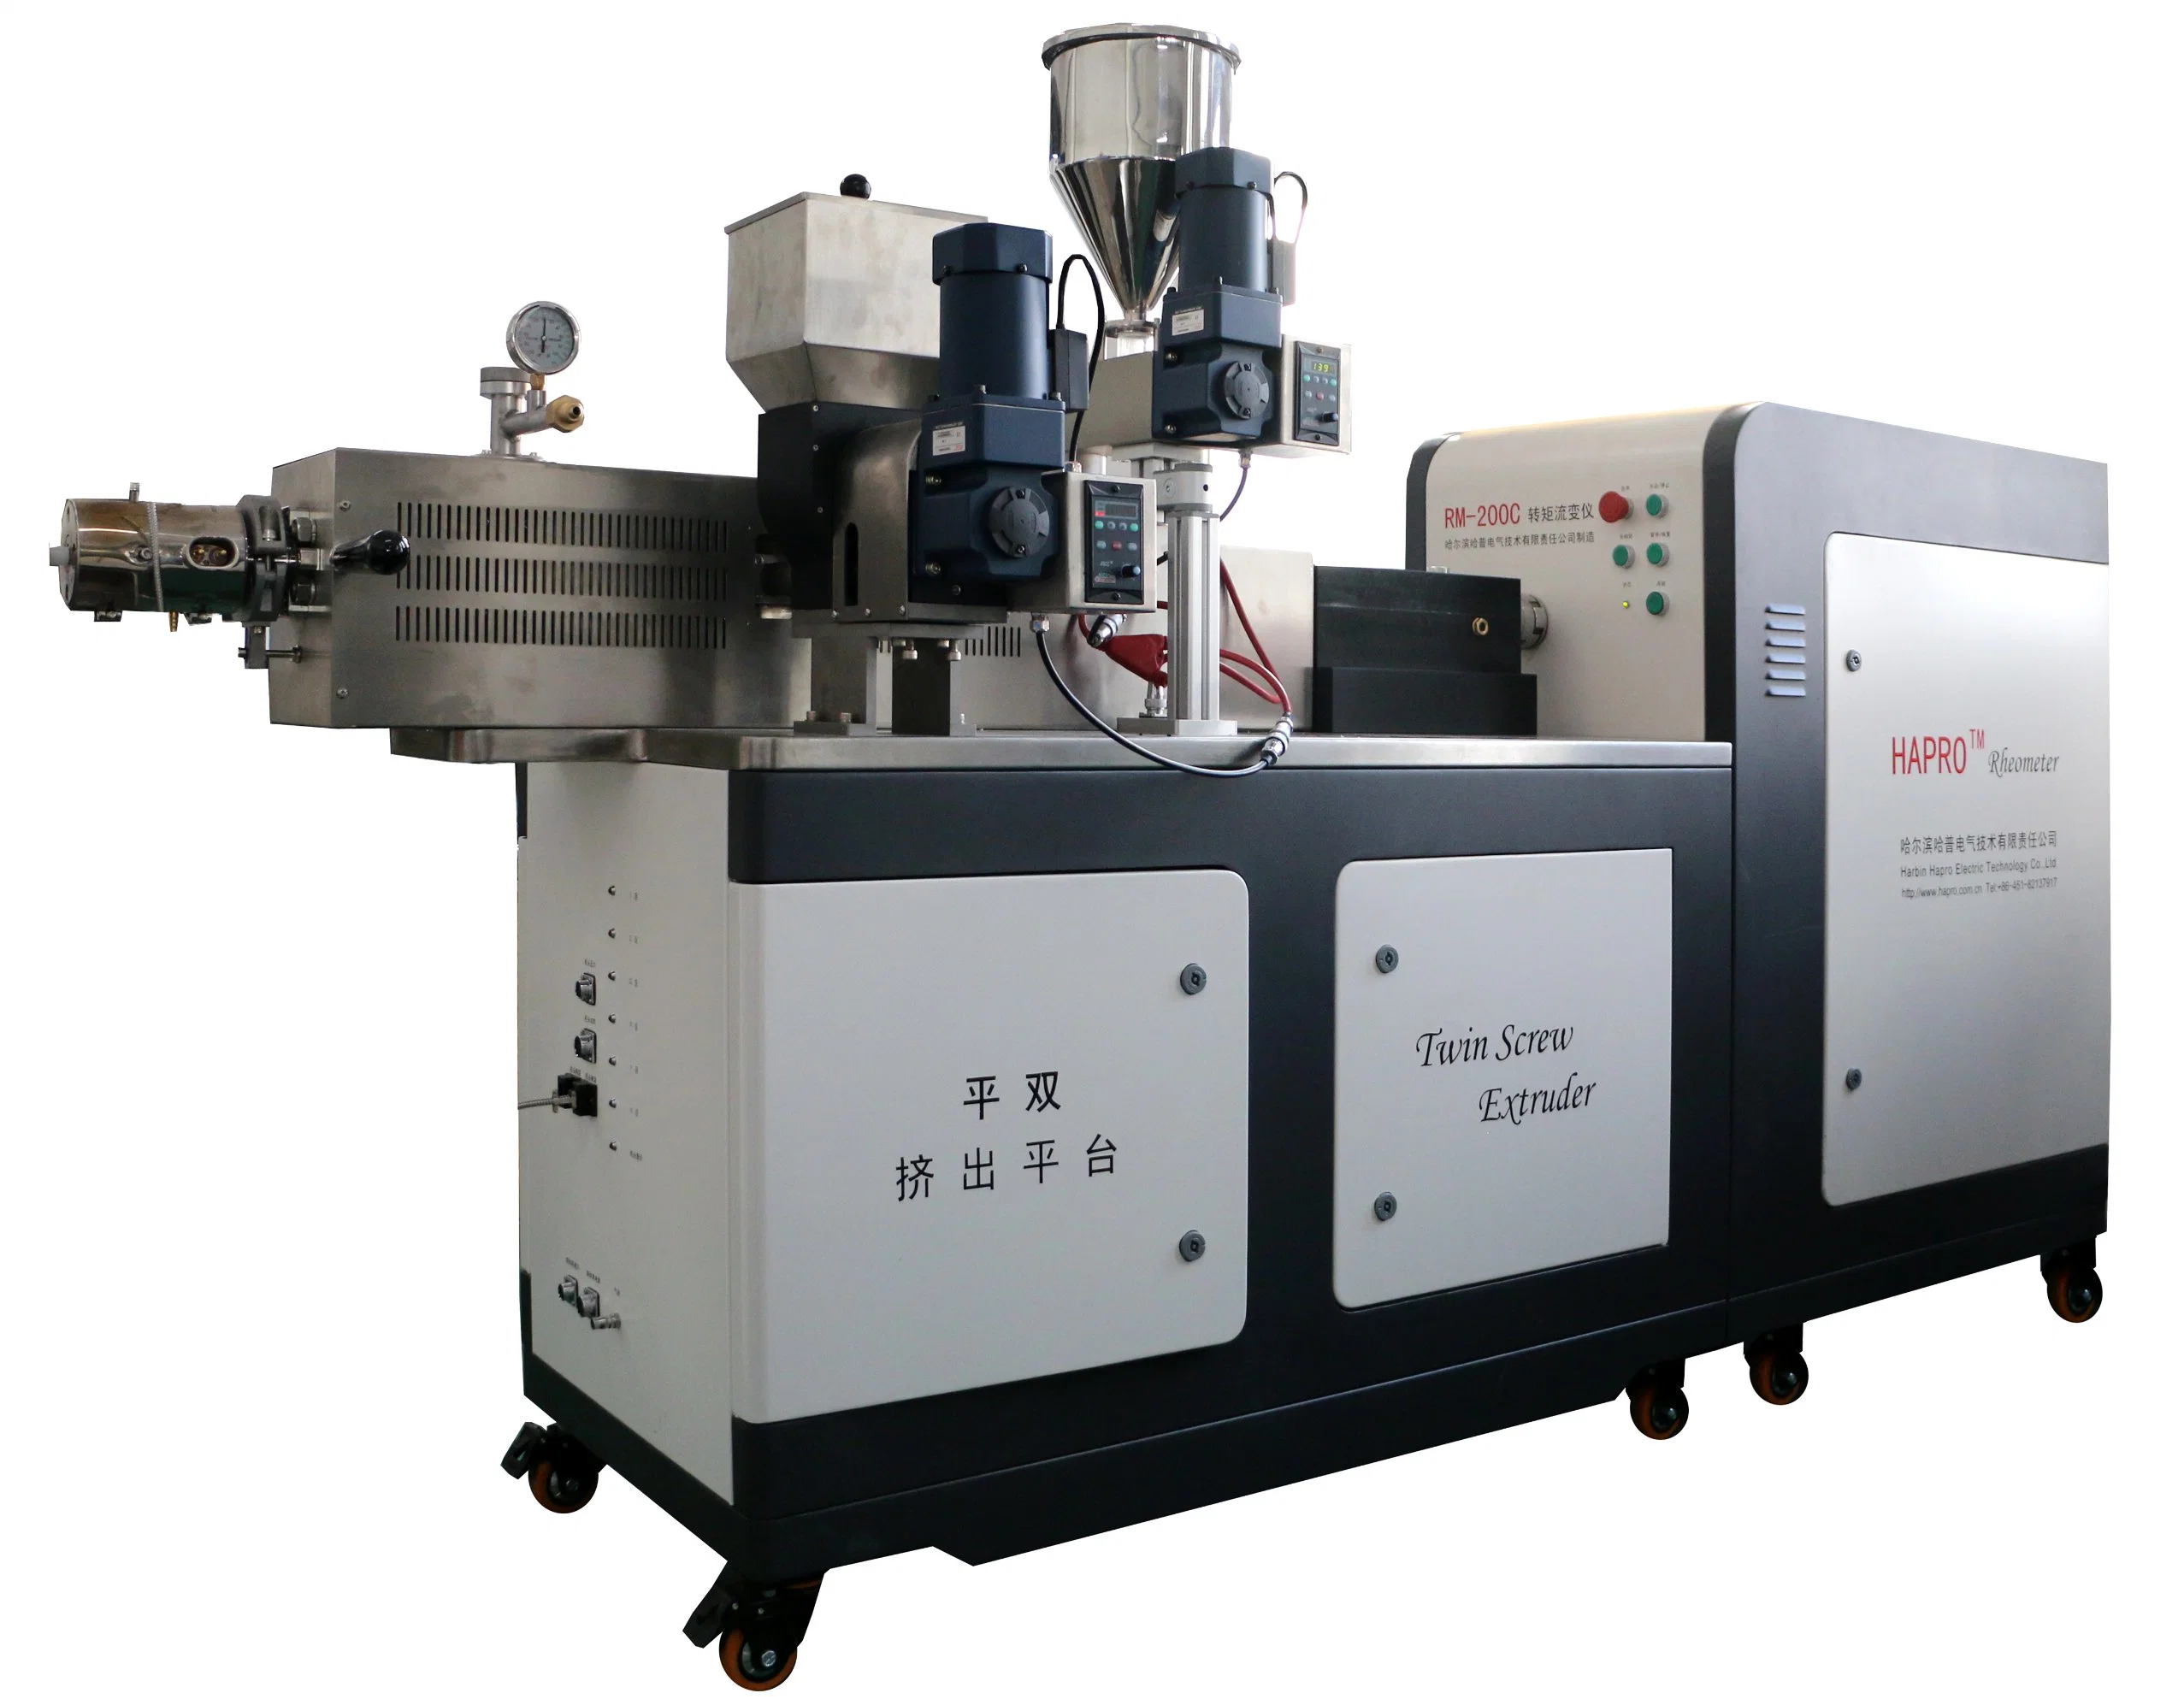 Parallel Co-Rotating Twin Screw Extrusion Test Unit with Torque Measurement System